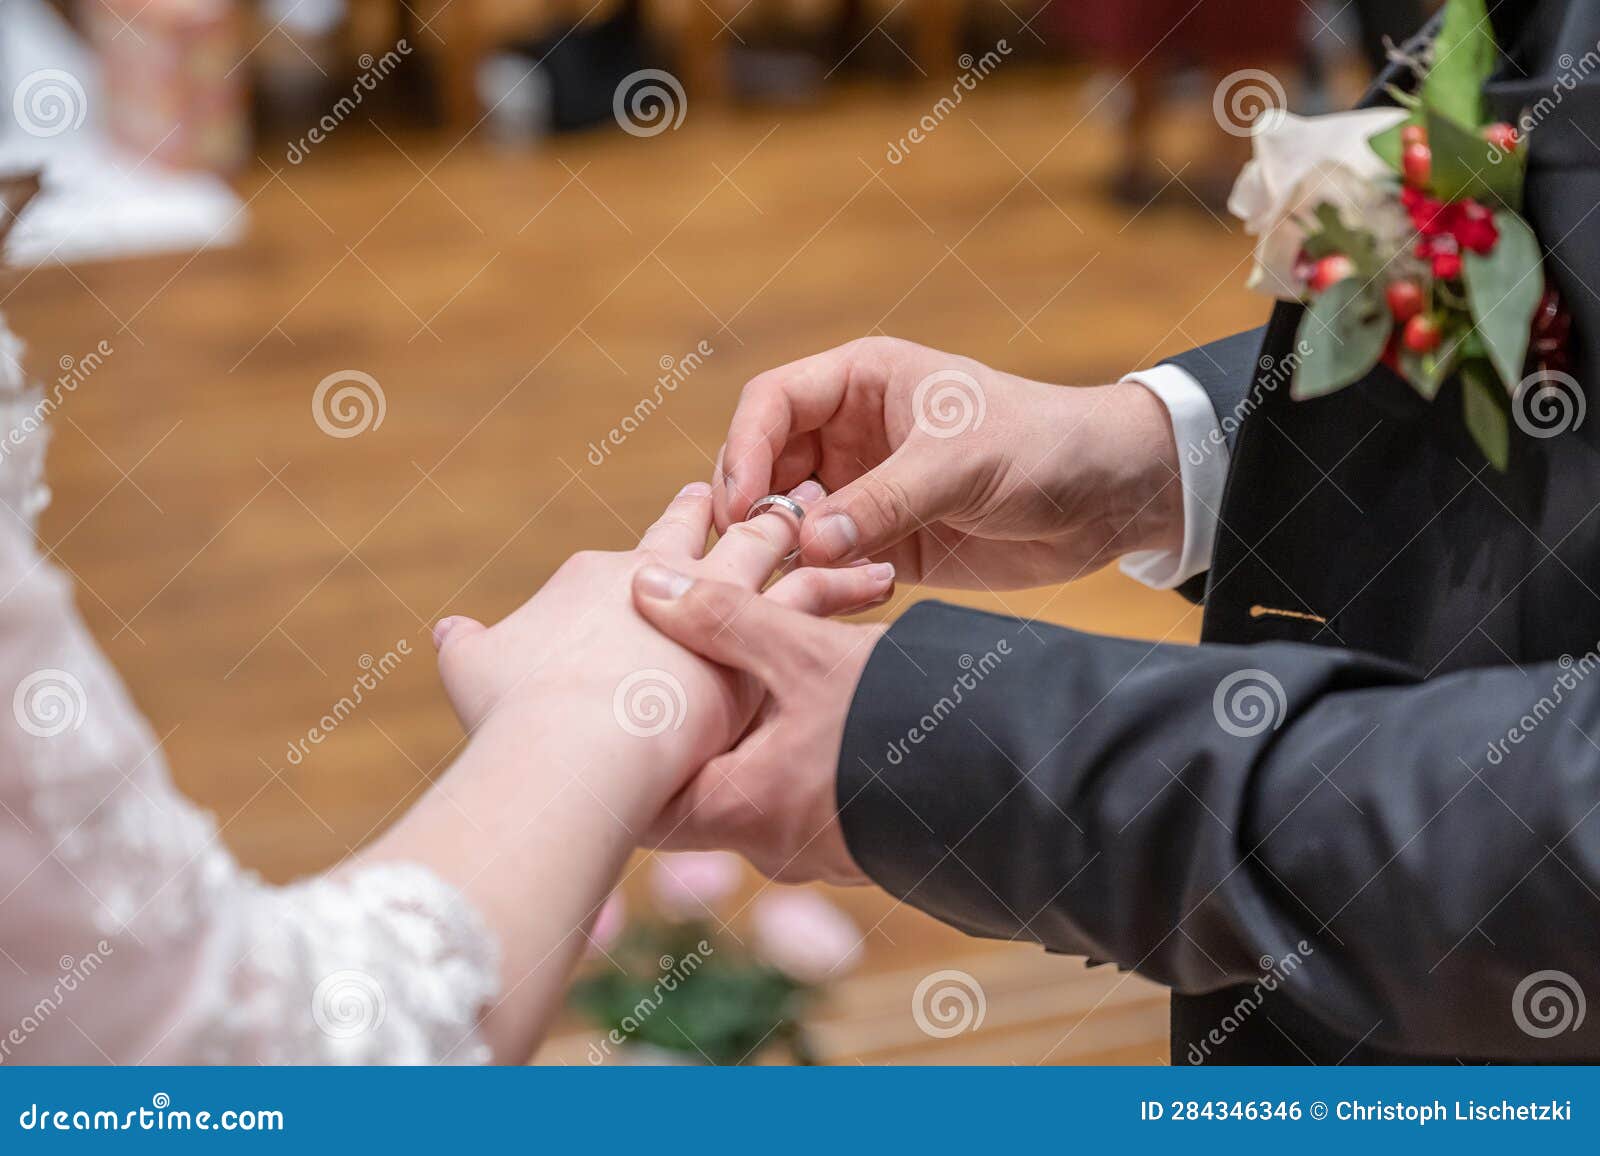 Wedding Ceremony Packages | Officiant Eric | Wedding ring exchange,  Traditional wedding rings, Wedding ceremony package